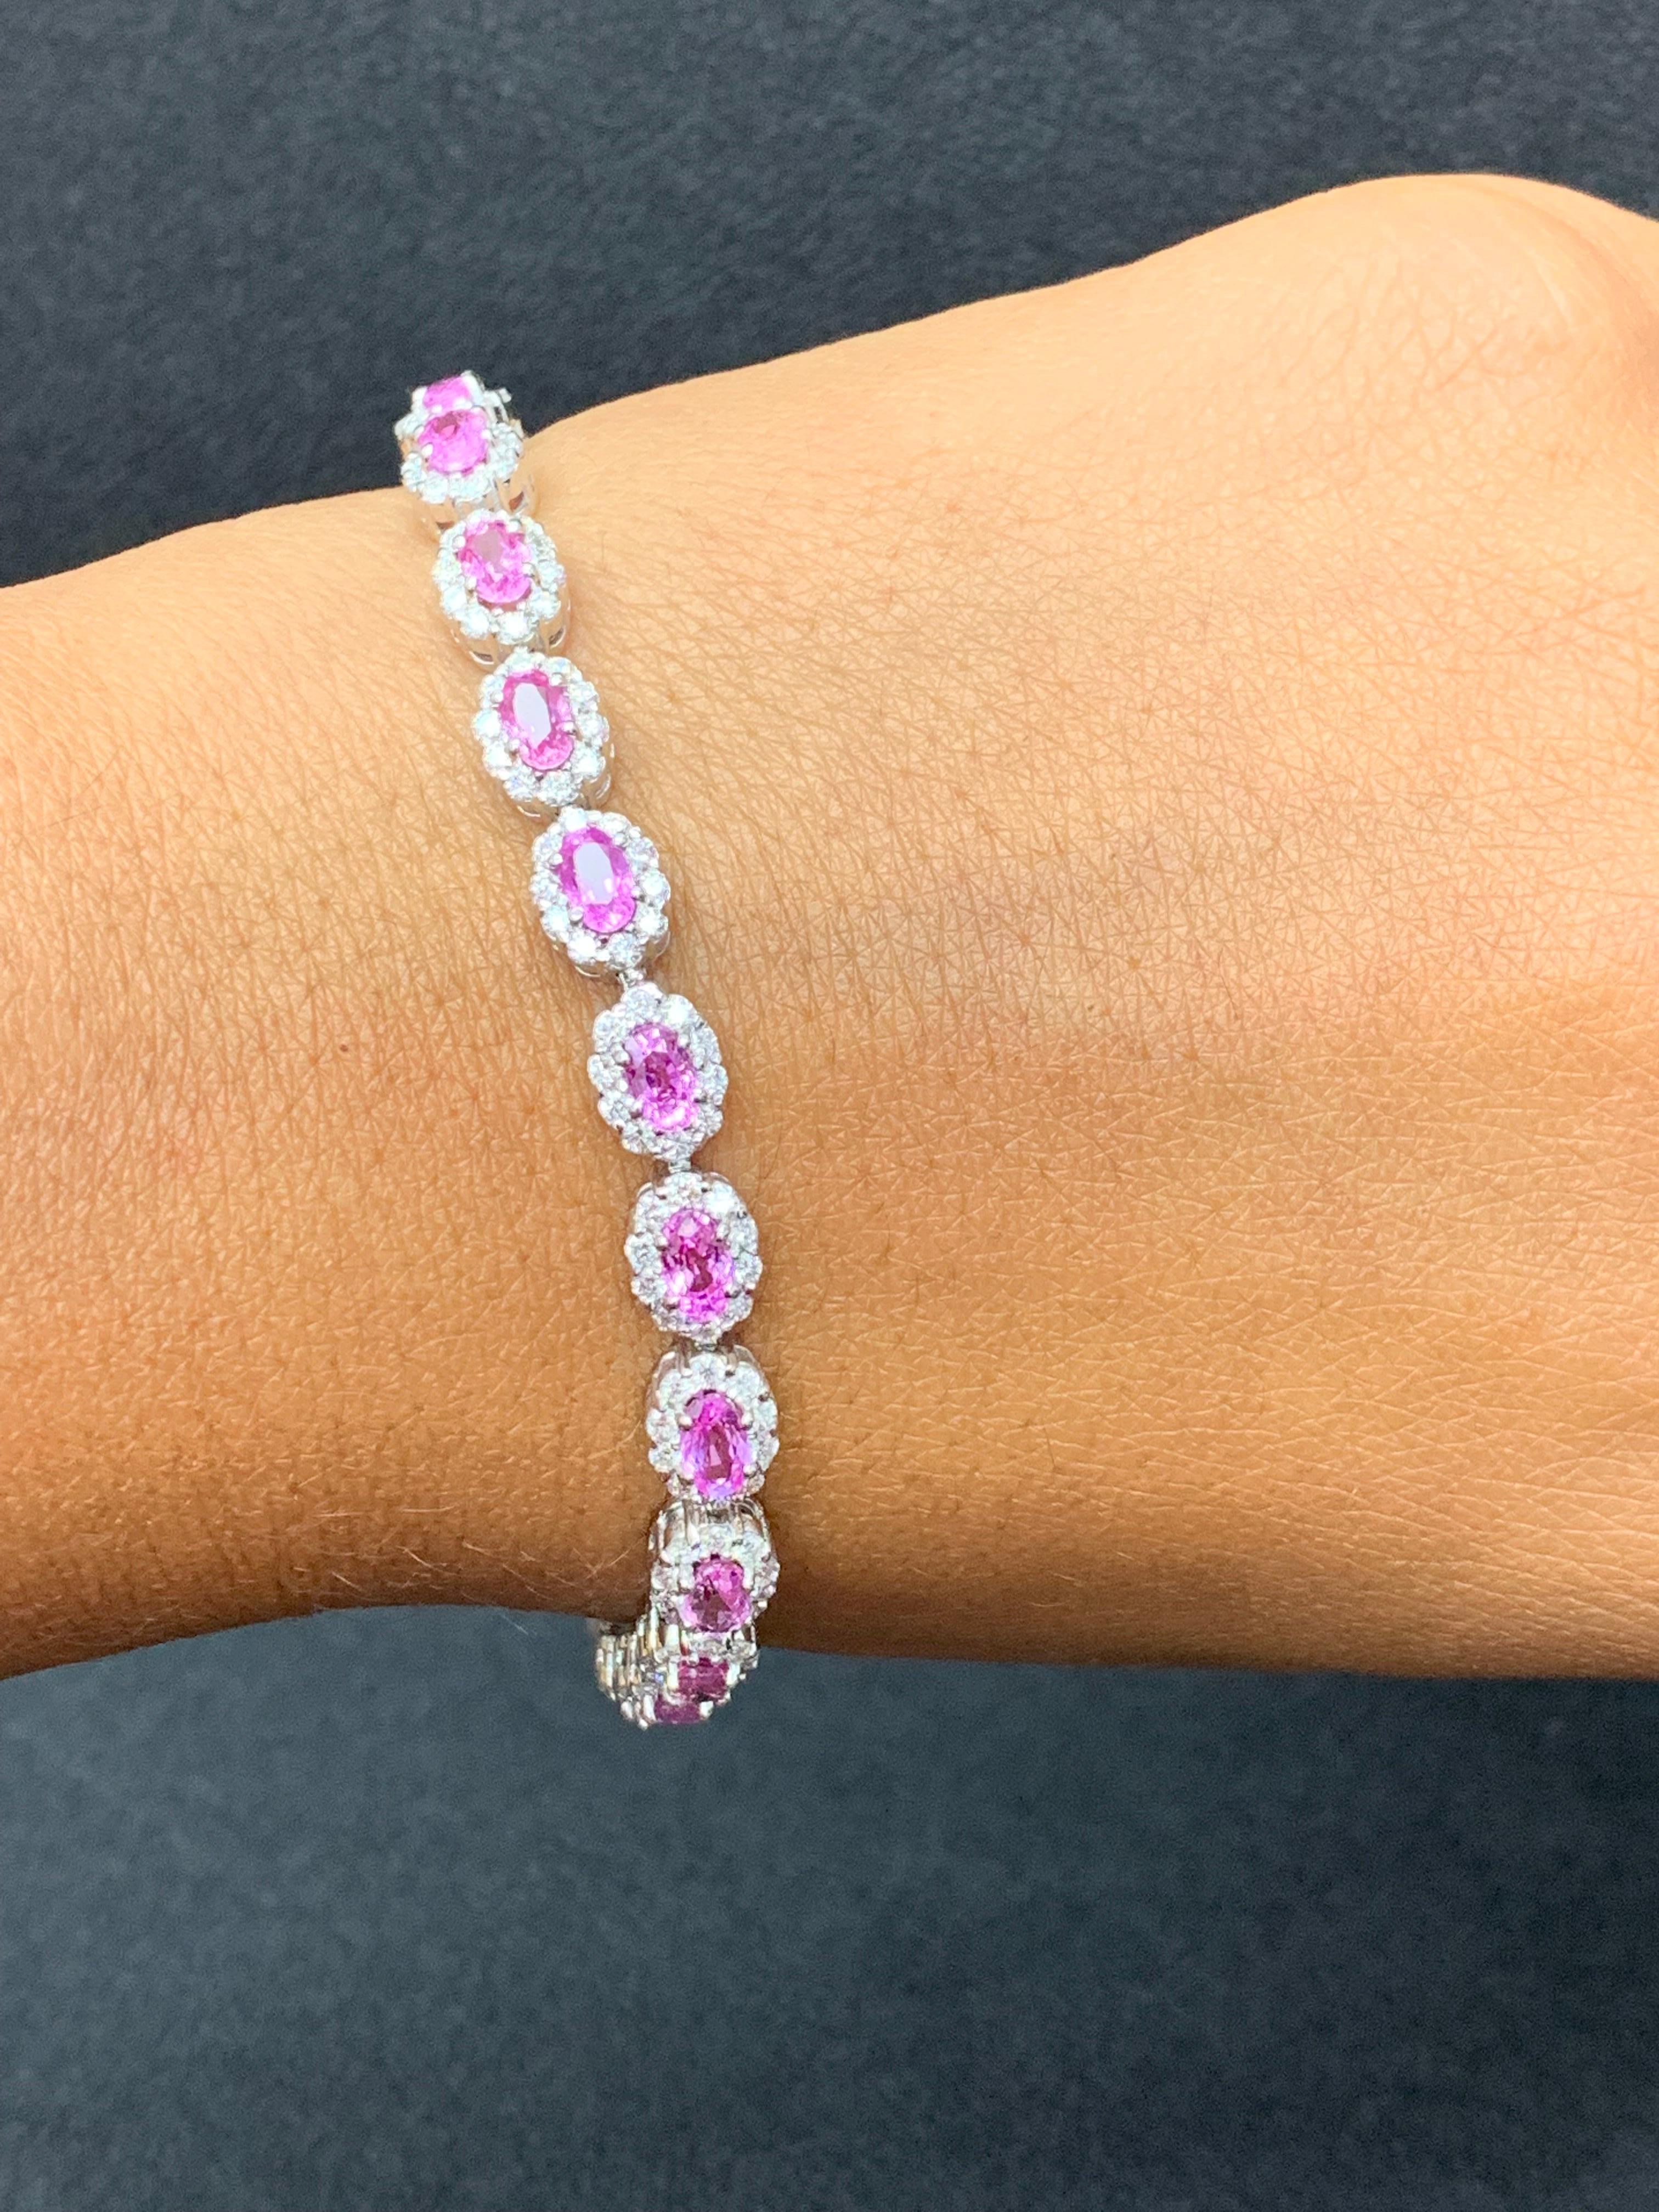 7.21 Carat Oval Cut Pink Sapphire and Diamond Halo Bracelet in 14K White Gold For Sale 2